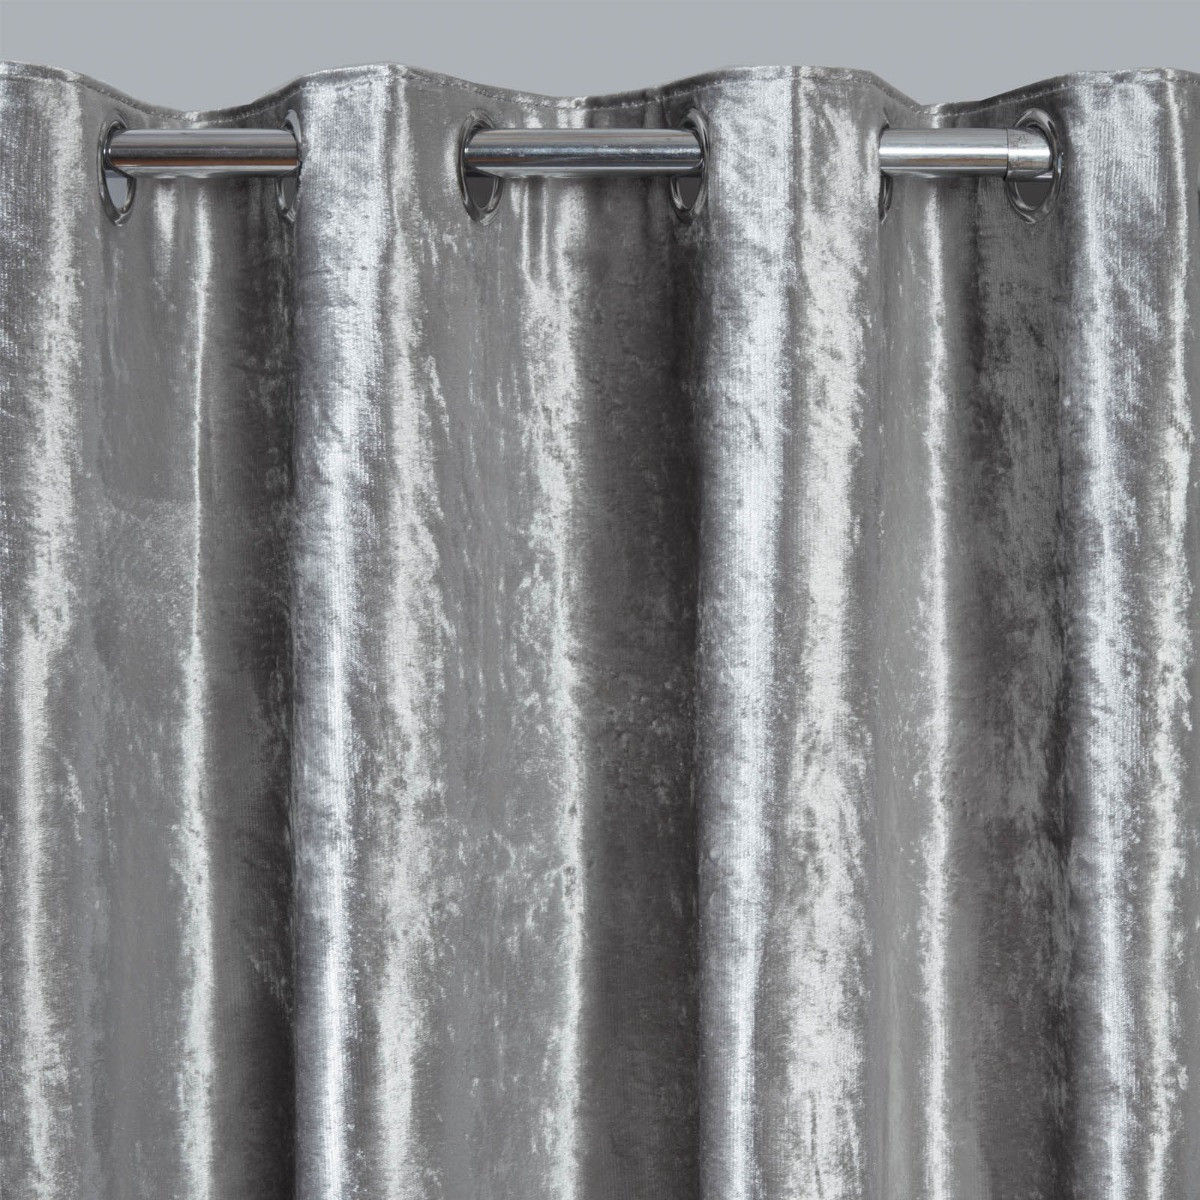 Sienna Home Crushed Velvet Eyelet Curtains - Silver 90" x 72">